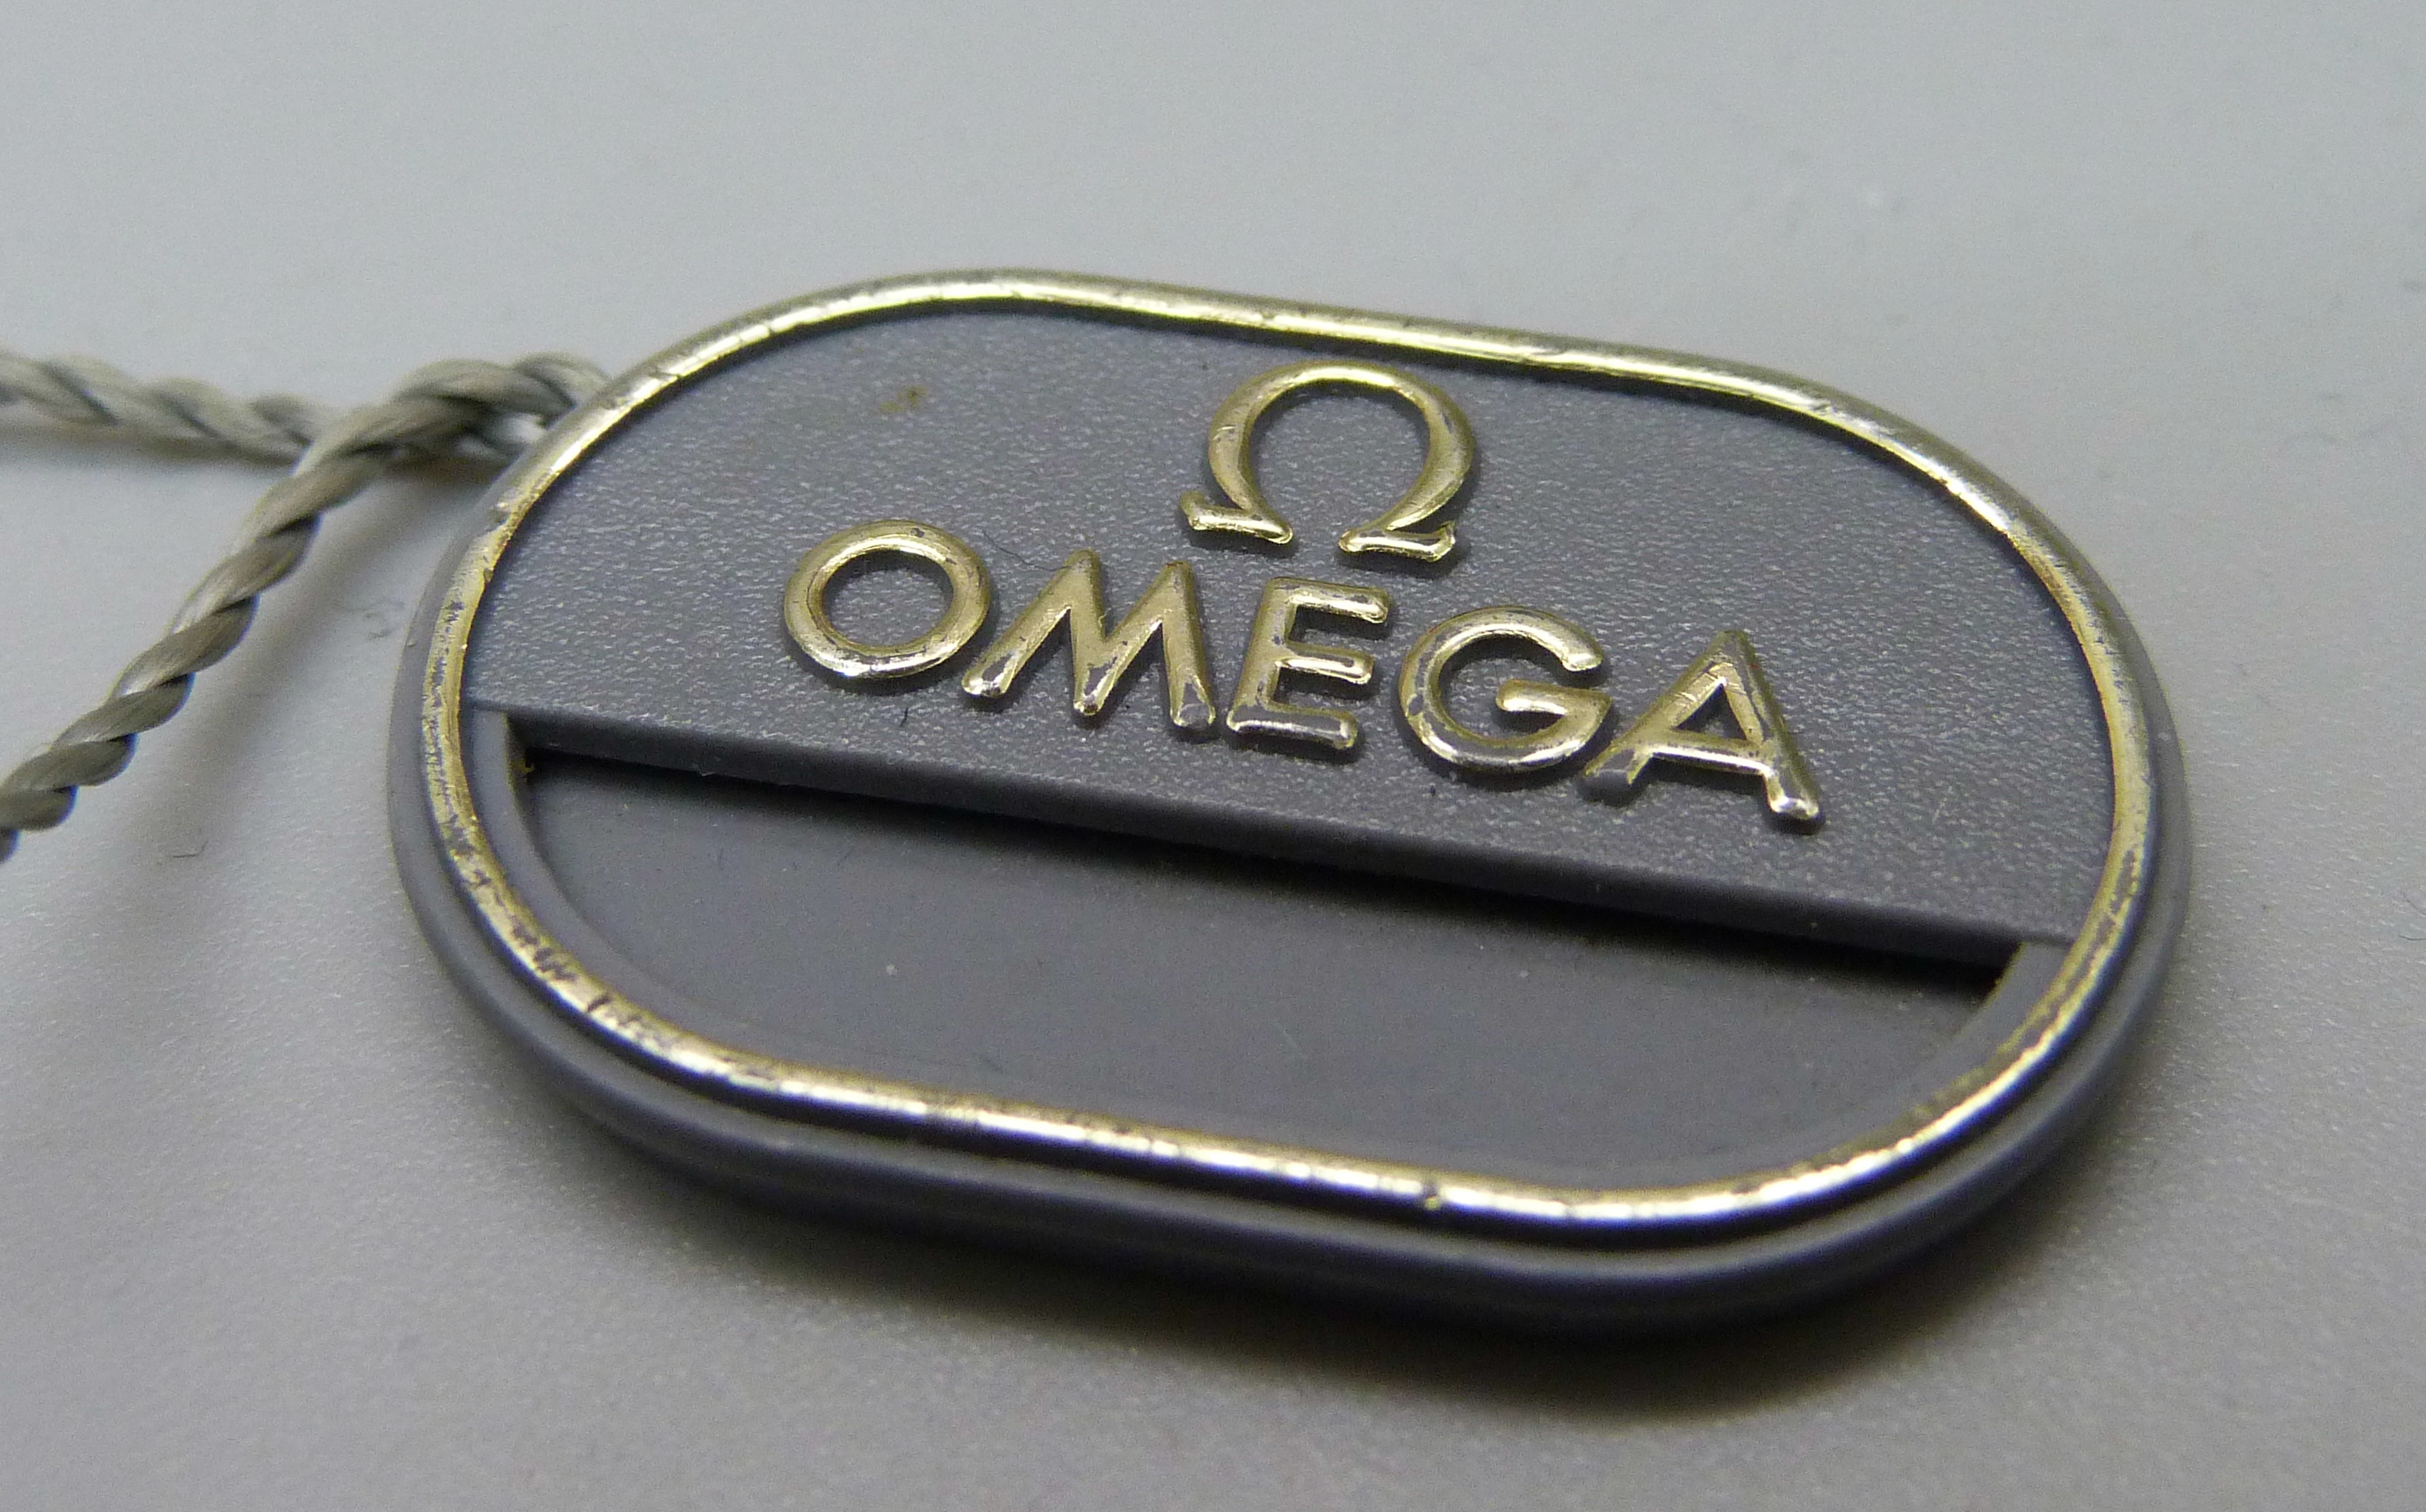 An Omega wristwatch with 30T2 calibre movement - Image 6 of 9